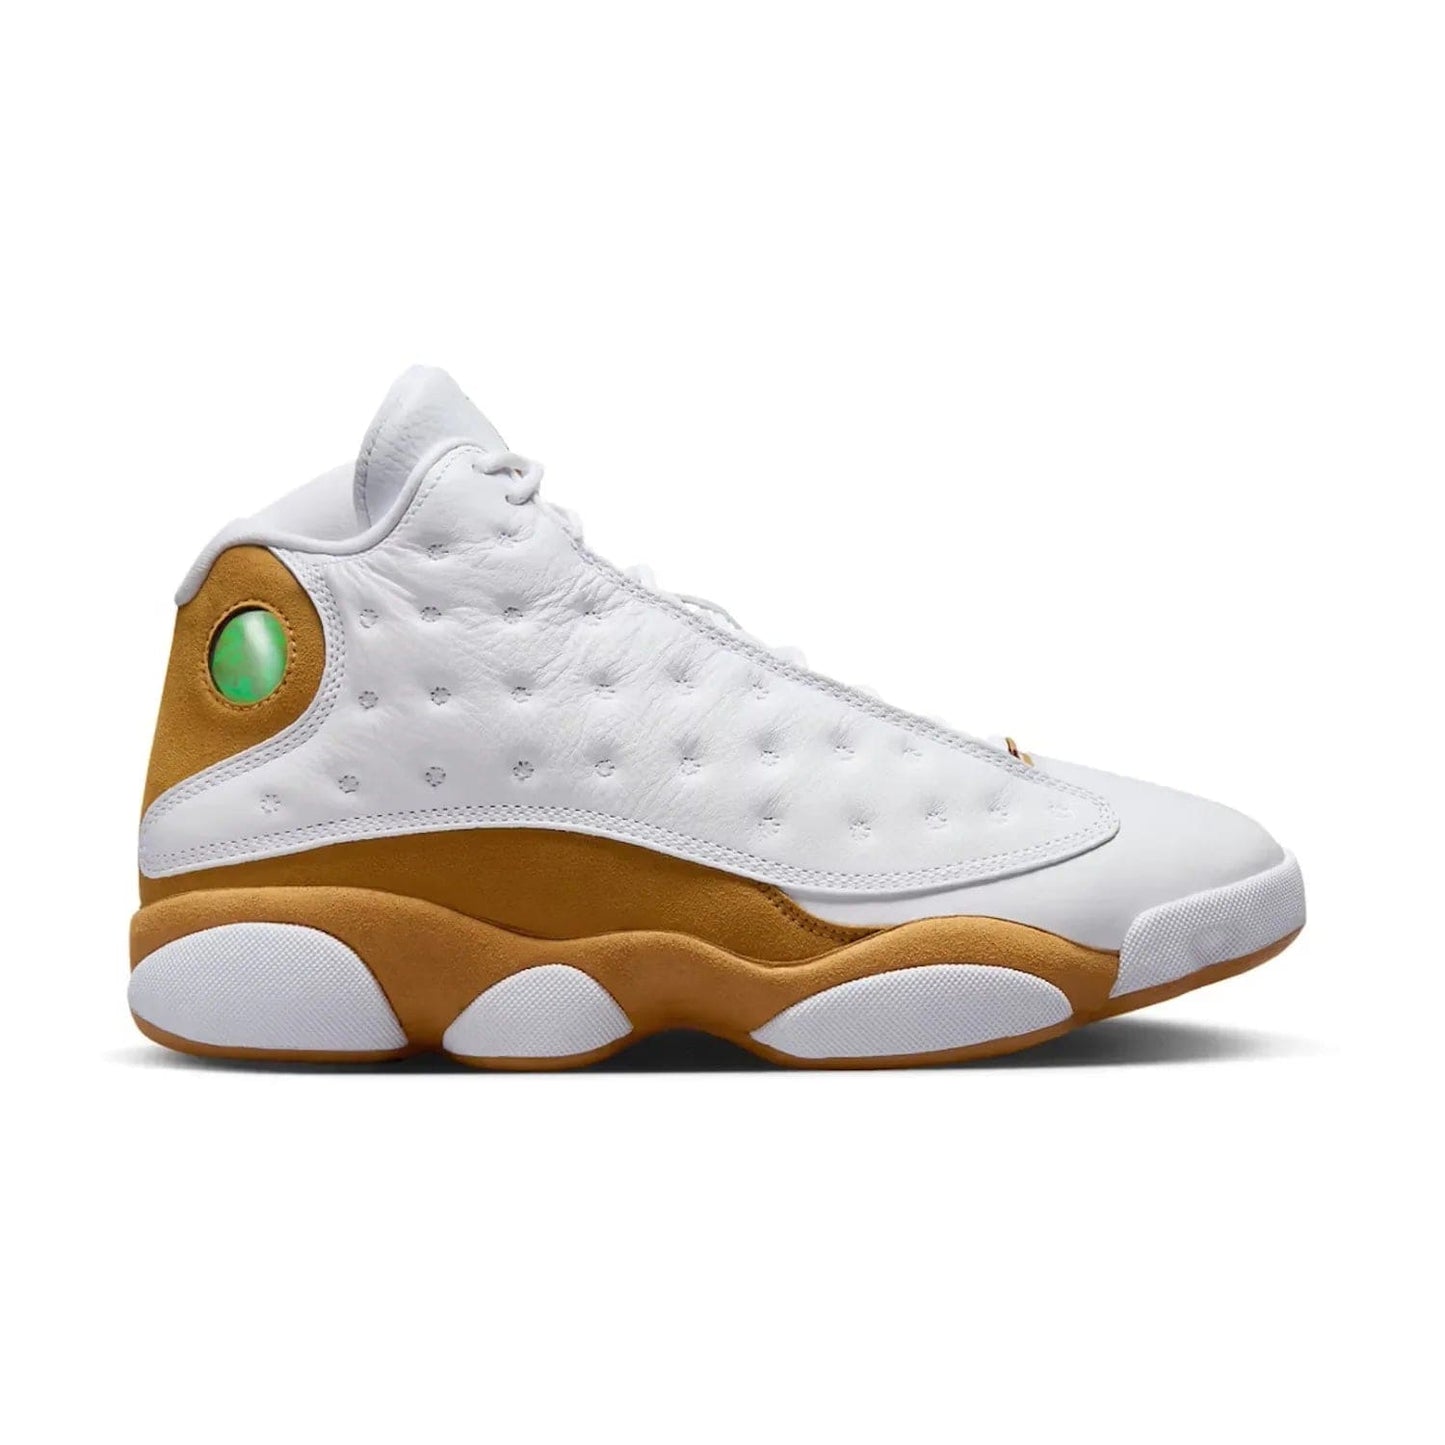 Jordan 13 Retro Wheat (2023) - Image 1 - Only at www.BallersClubKickz.com - Stay ahead of the game with the Jordan 13 Retro "Wheat", the 2023 edition of the iconic silhouette. Tumbled leather uppers in crisp white, nubuck wheat tone overlays, signature holograms, and Jumpman logo. Secure a piece of Jordan history. Out November 21, 2023.